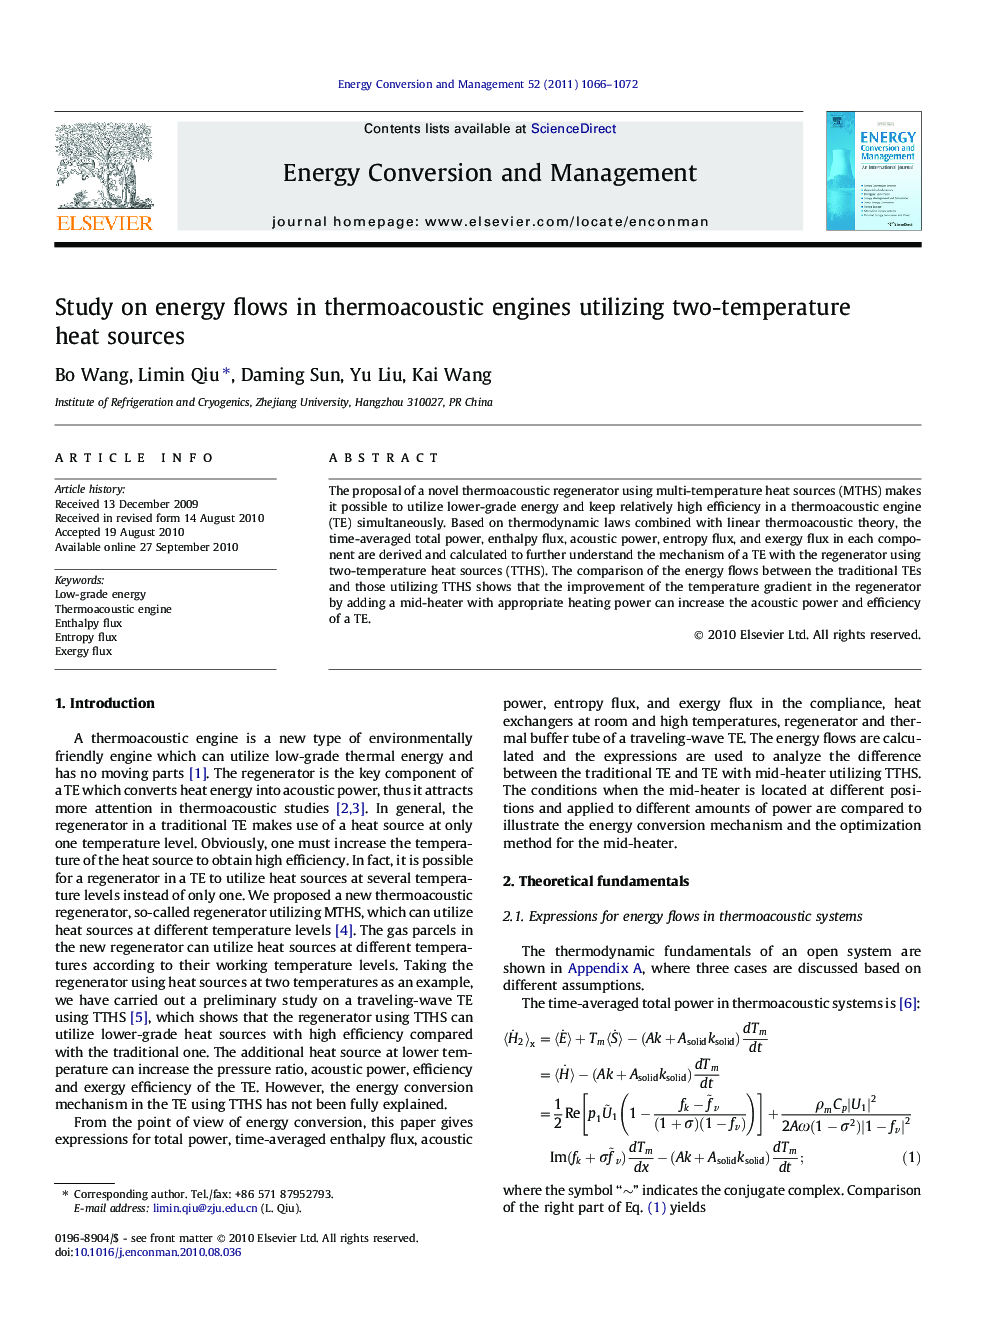 Study on energy flows in thermoacoustic engines utilizing two-temperature heat sources